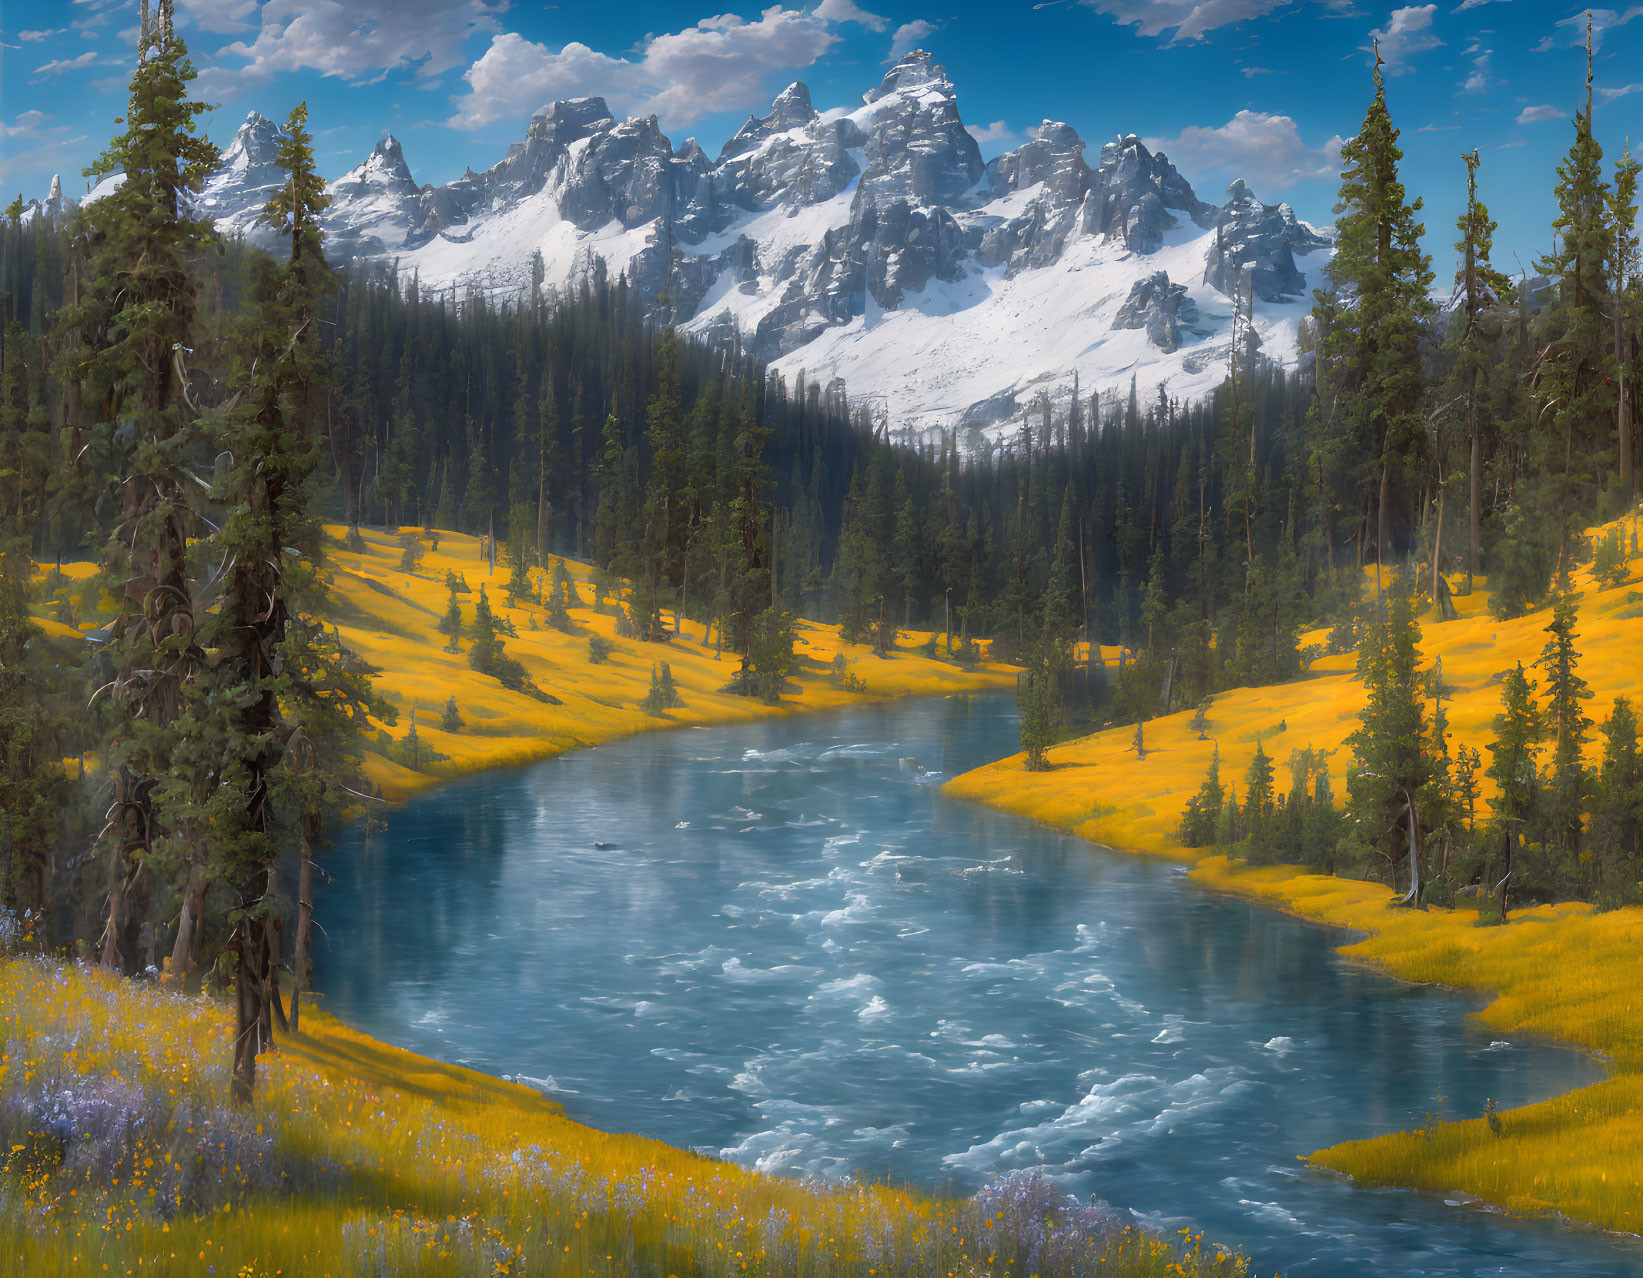 Vibrant blue river in meadow with wildflowers, pine trees, and snow-capped mountains